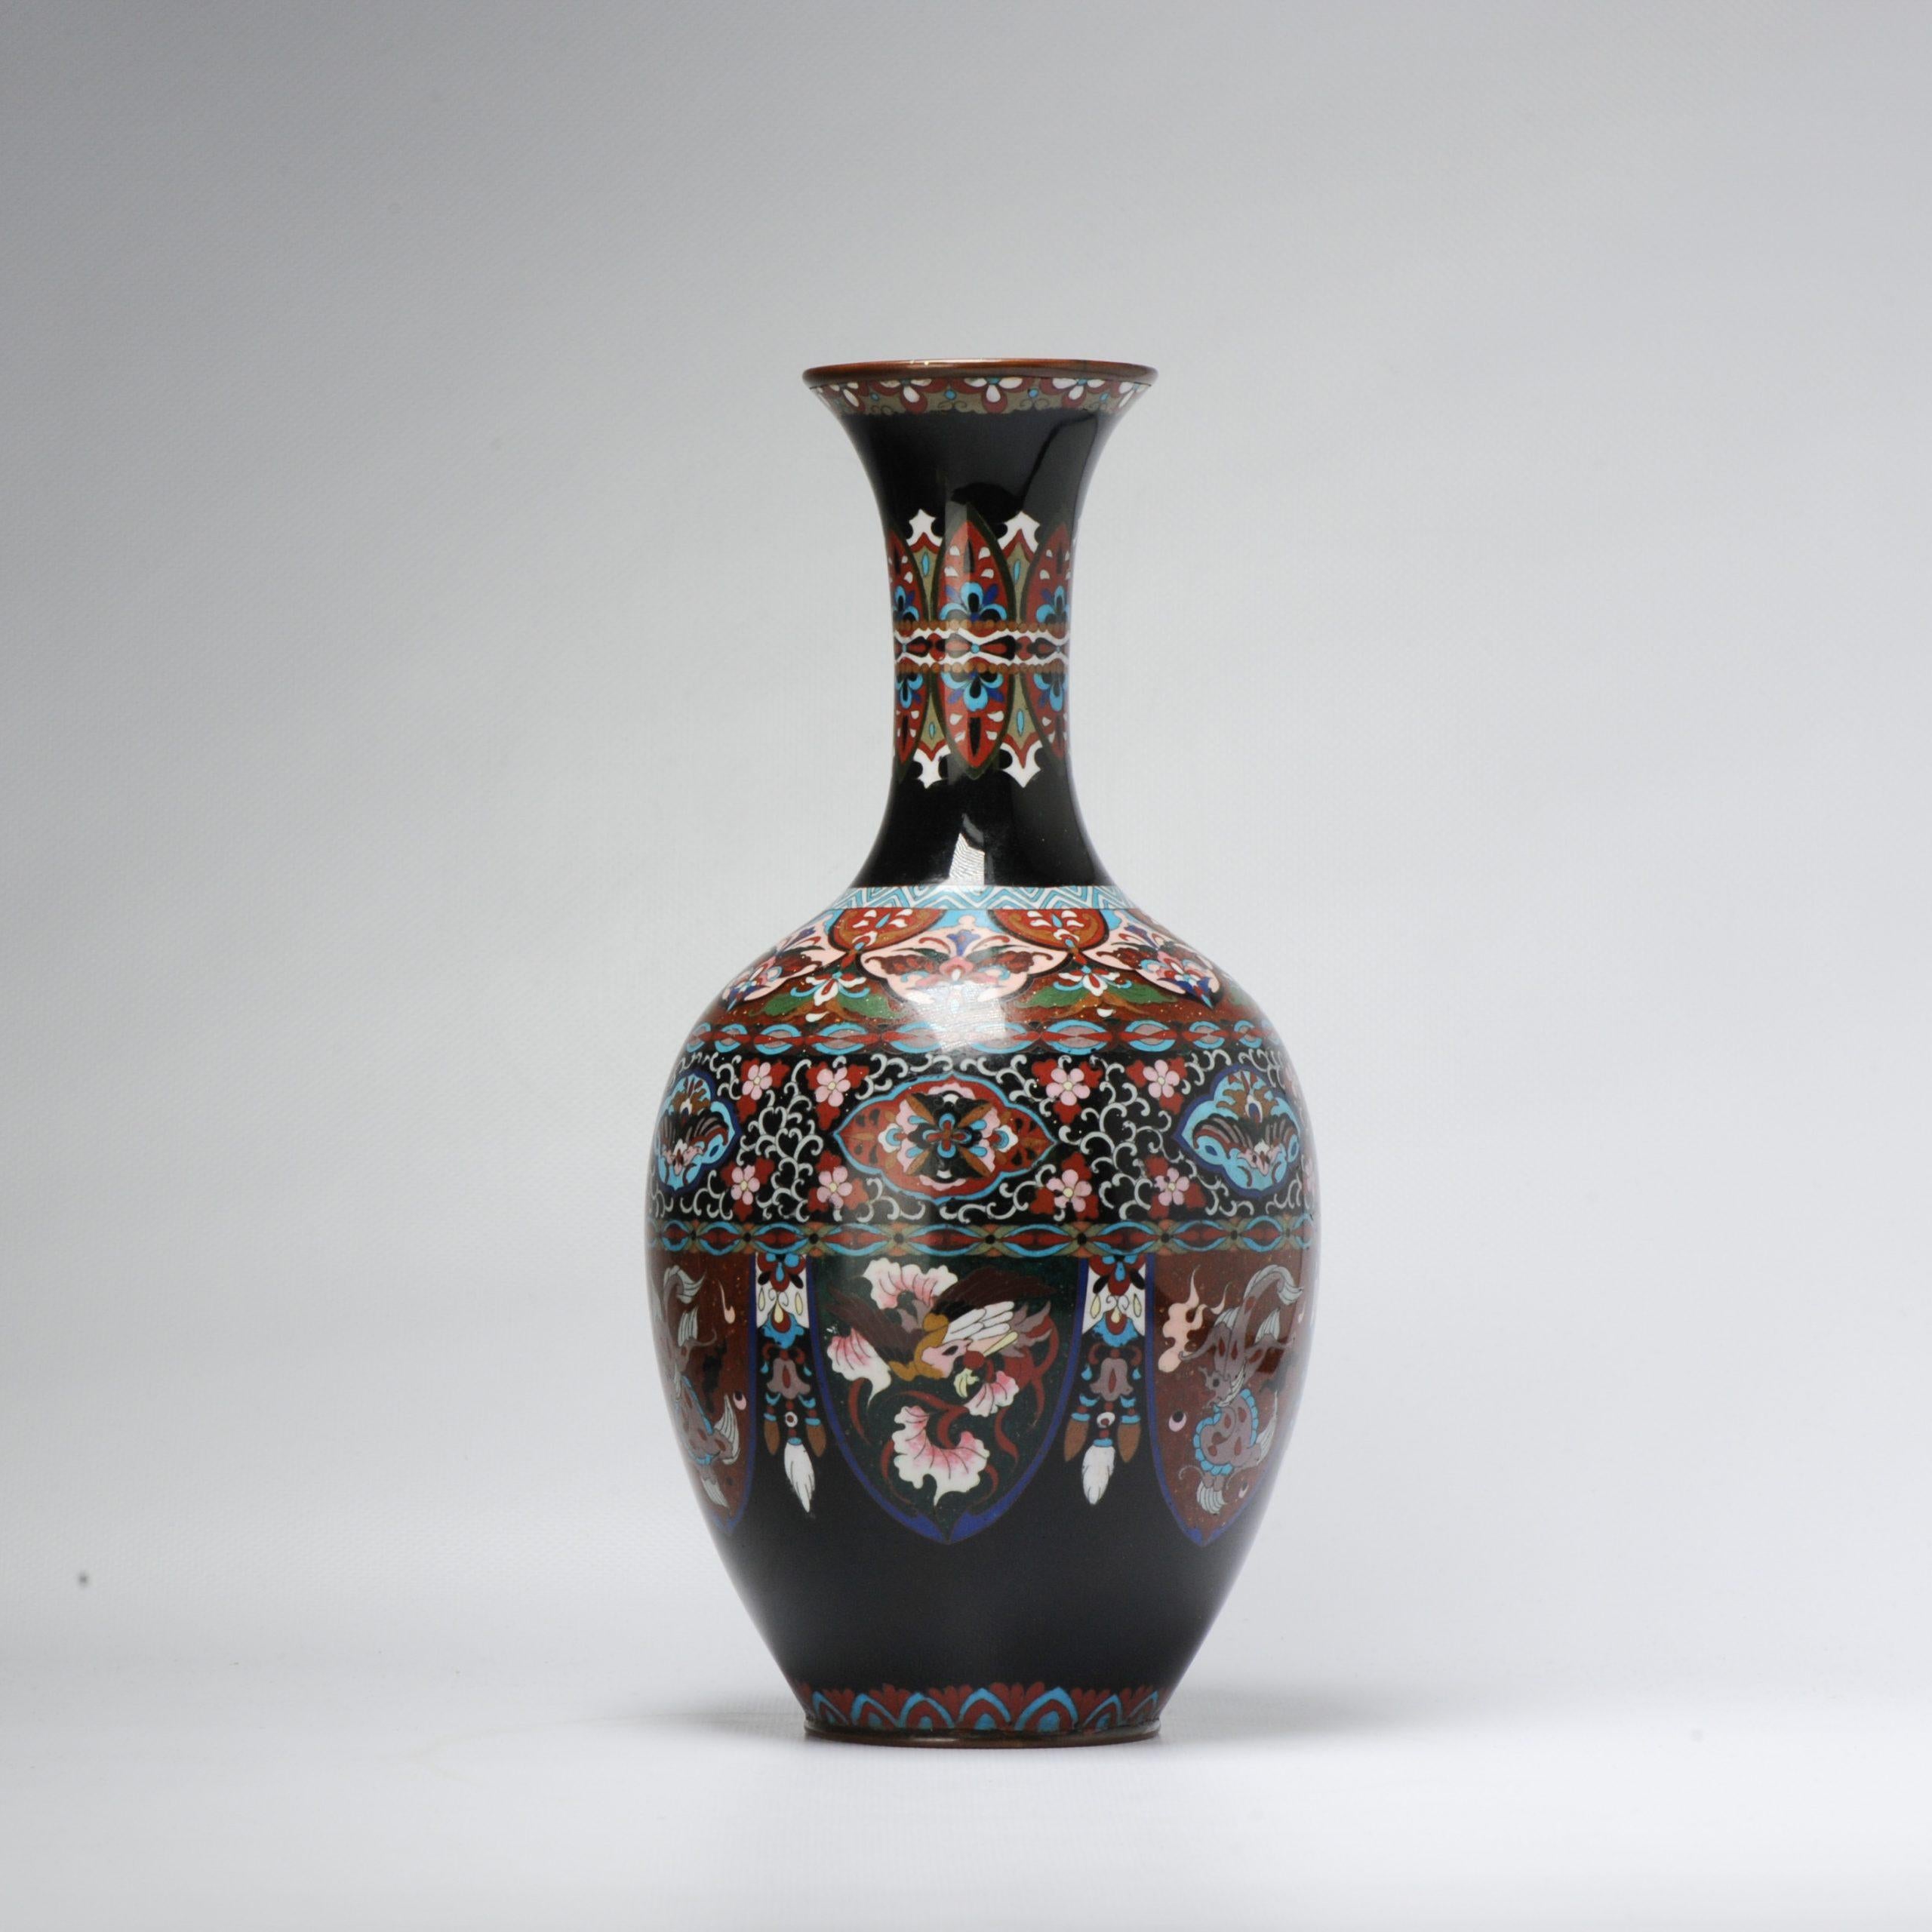 Description
Lovely and beautifully made piece.

Provenance:

Originally part of the Catherina collection of Japanese bronzes and cloisonne that was partly auctioned in Amsterdam in 2006 at Sothebys. Some pieces are pictured in the catalogue of